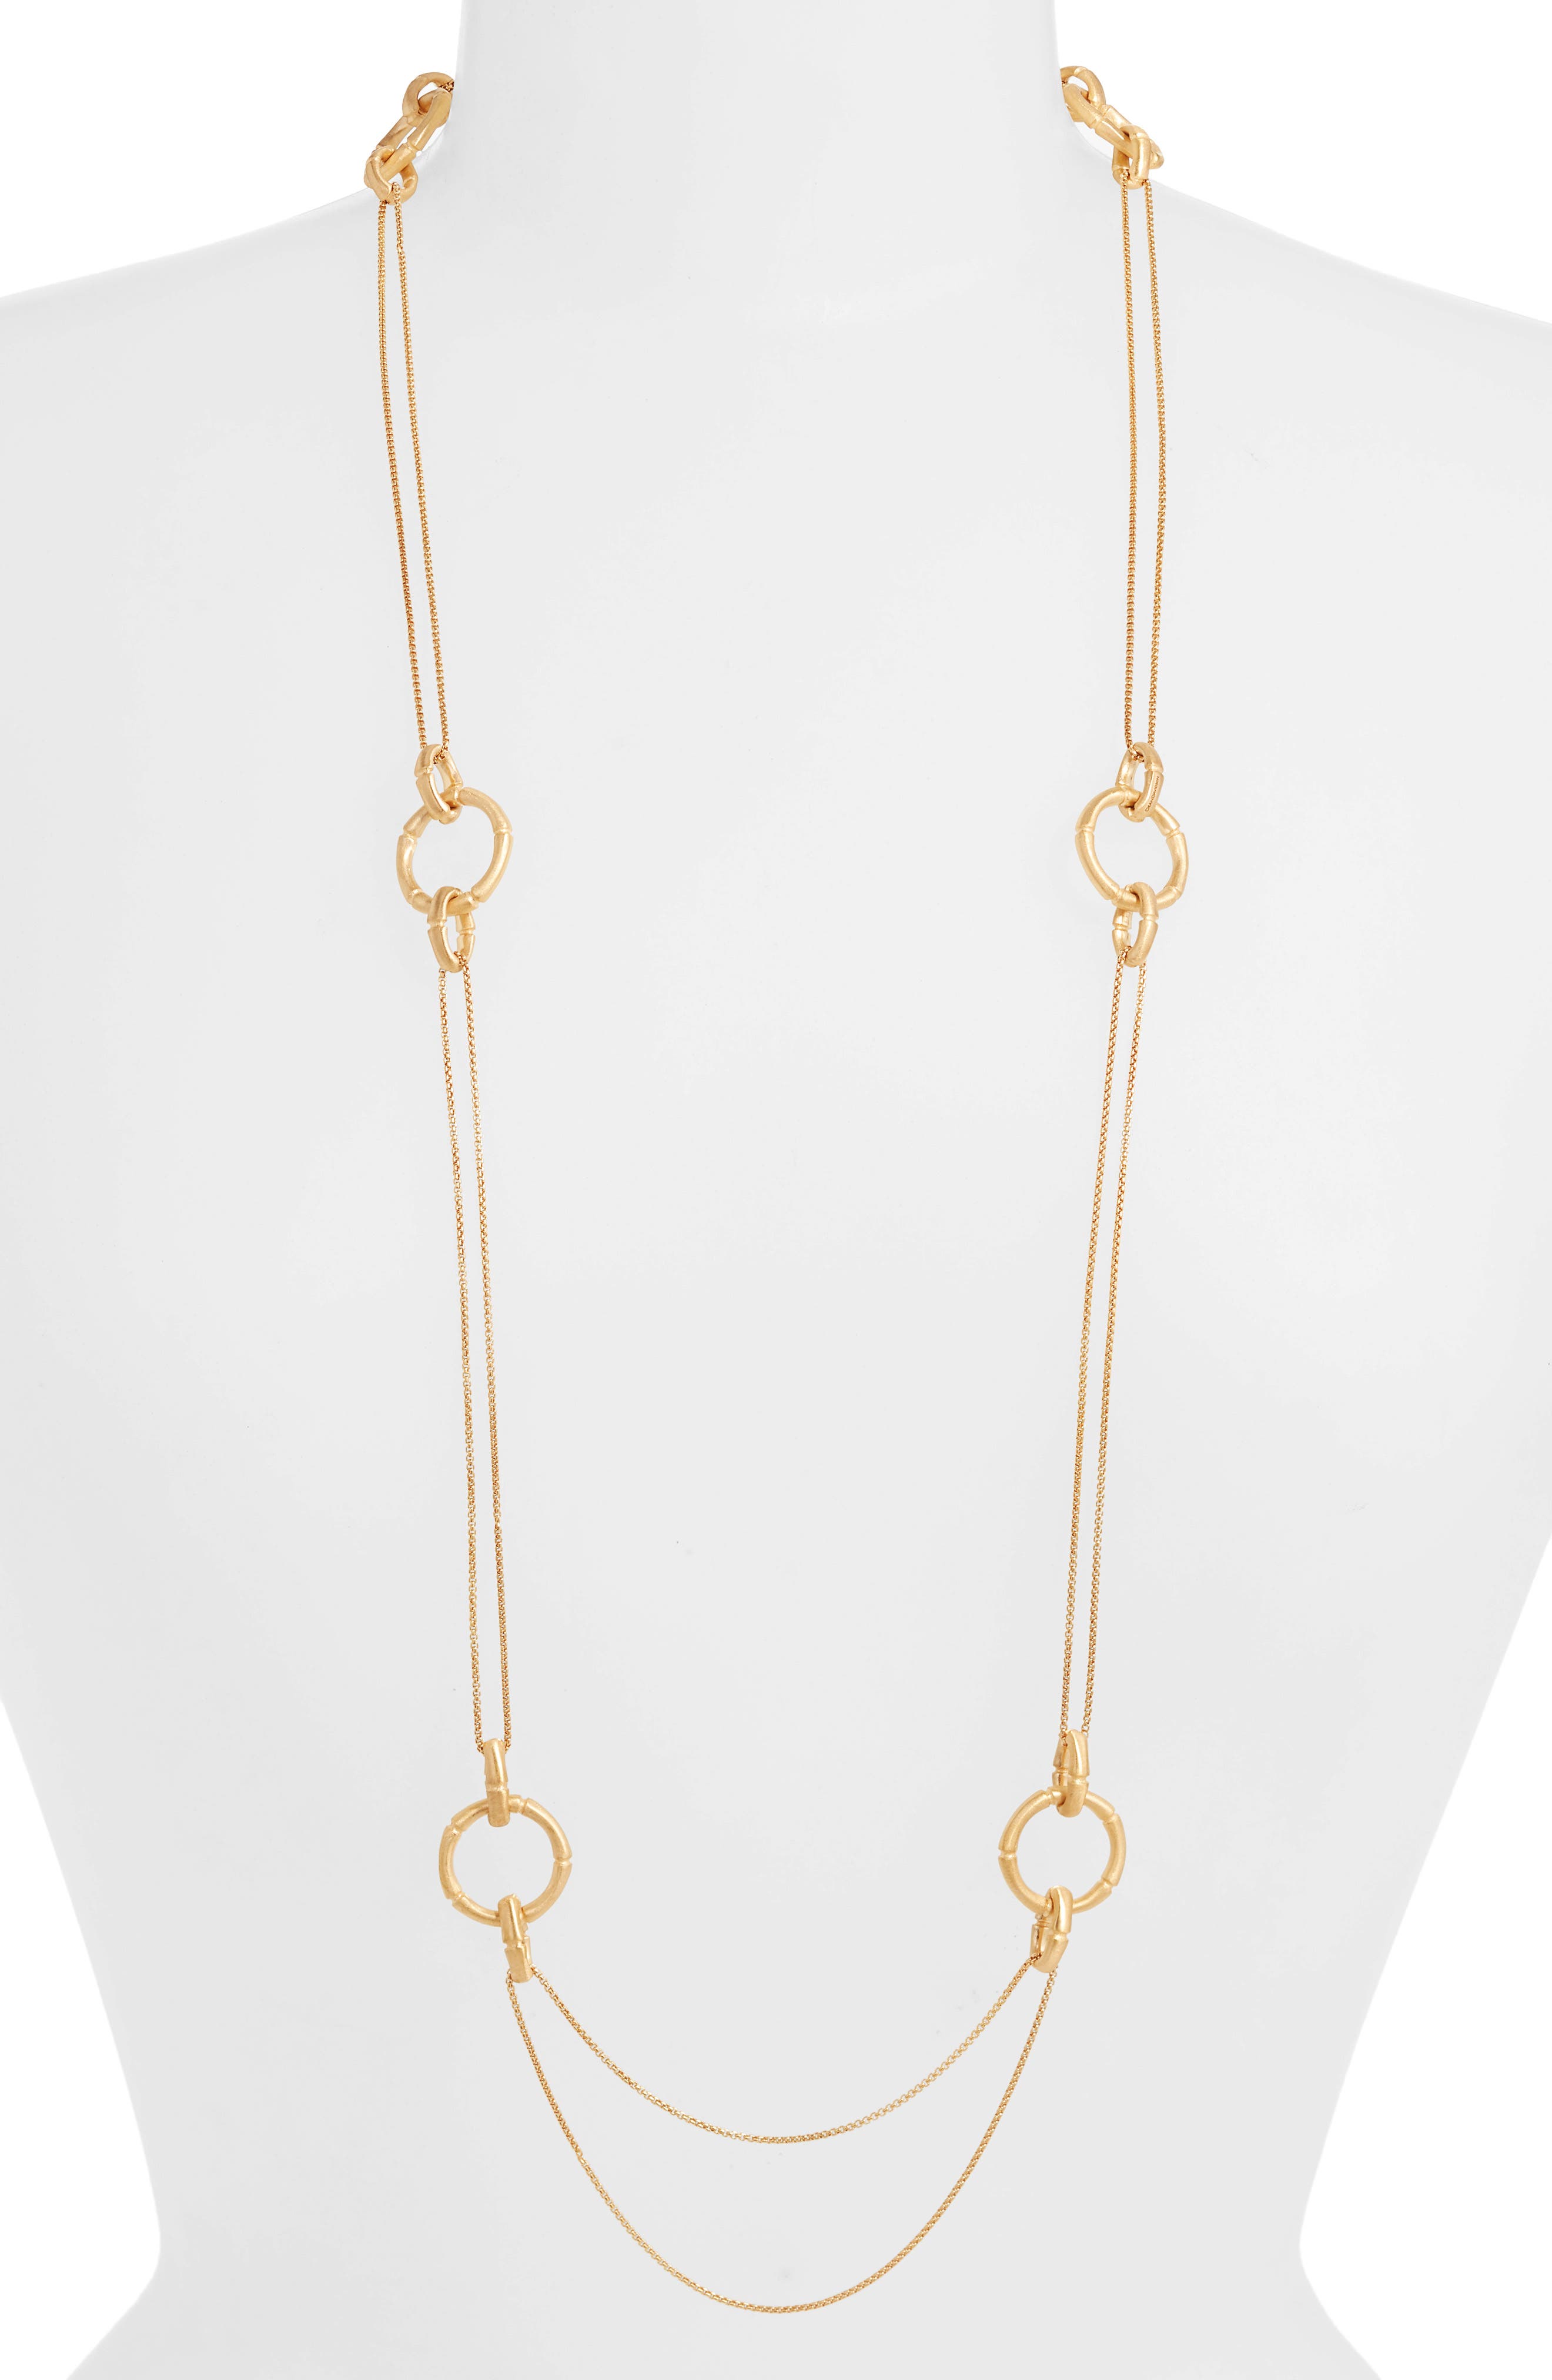 DEAN DAVIDSON BAMBOO SHAPED CHARM NECKLACE,628242353793